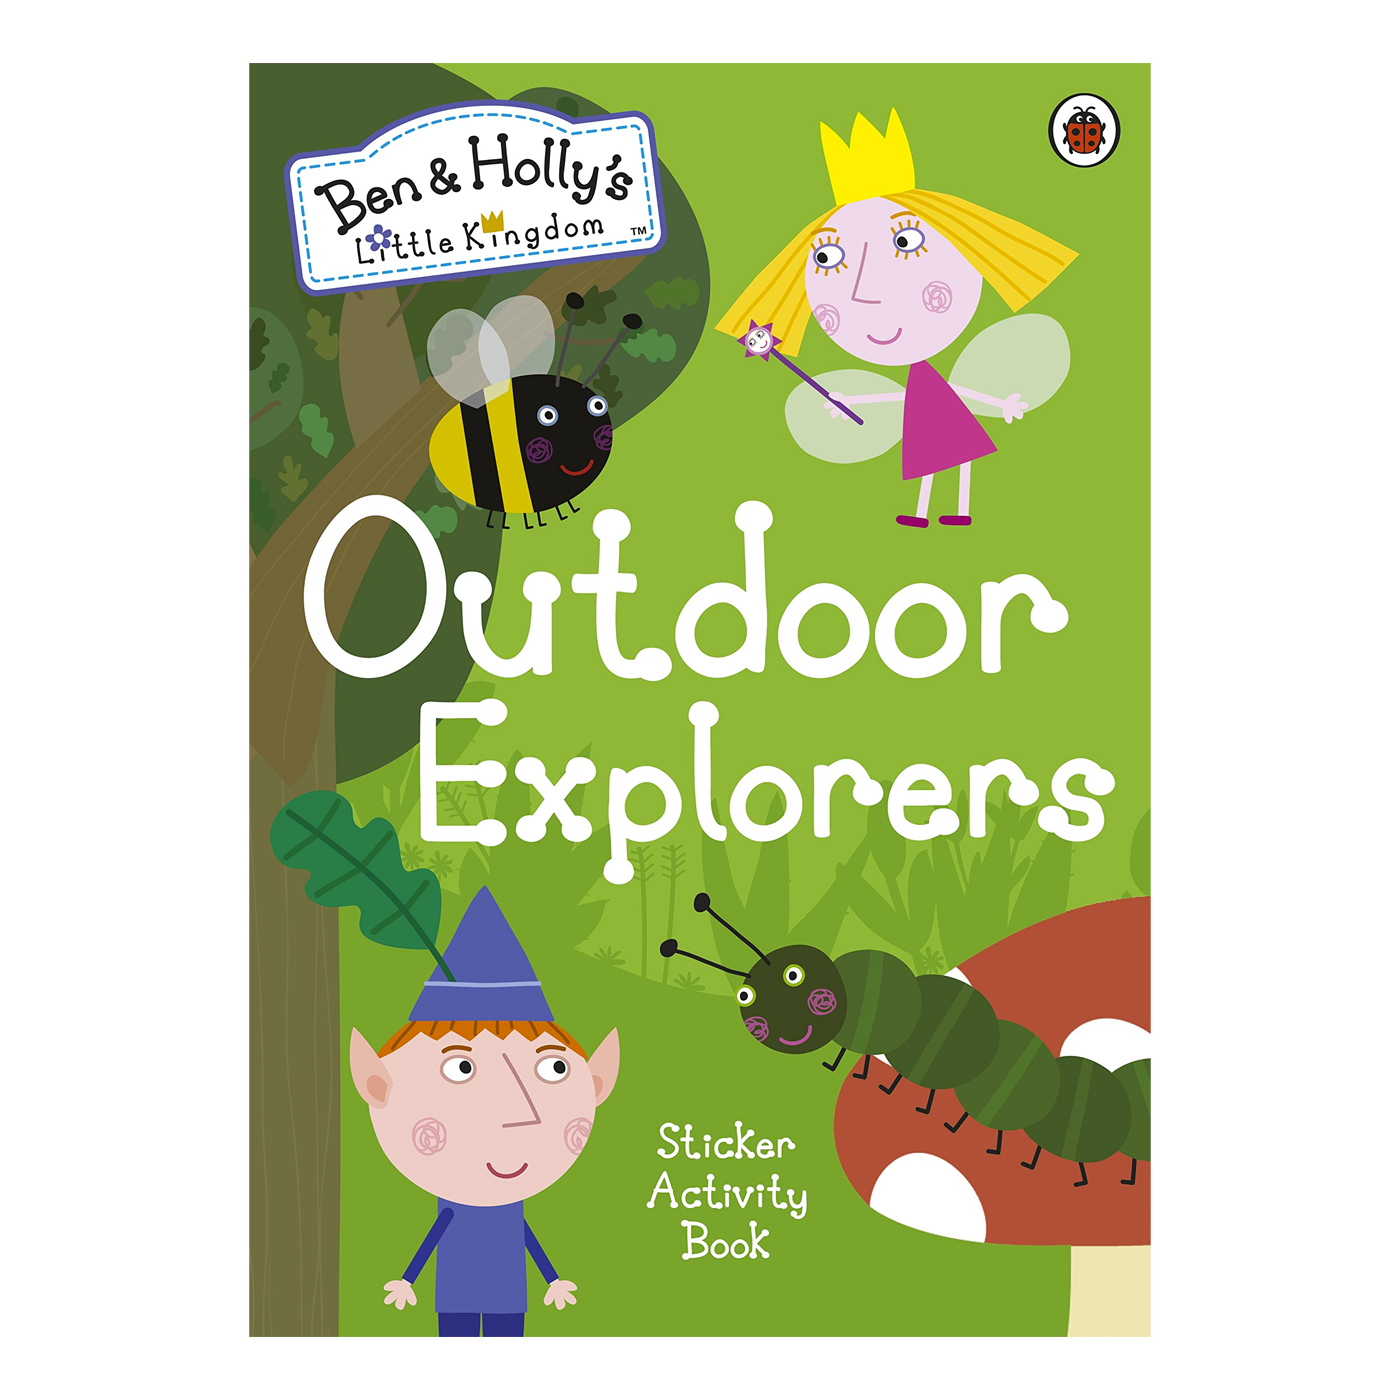  Ben and Holly's Little Kingdom: Outdoor Explorers Sticker Activity Book